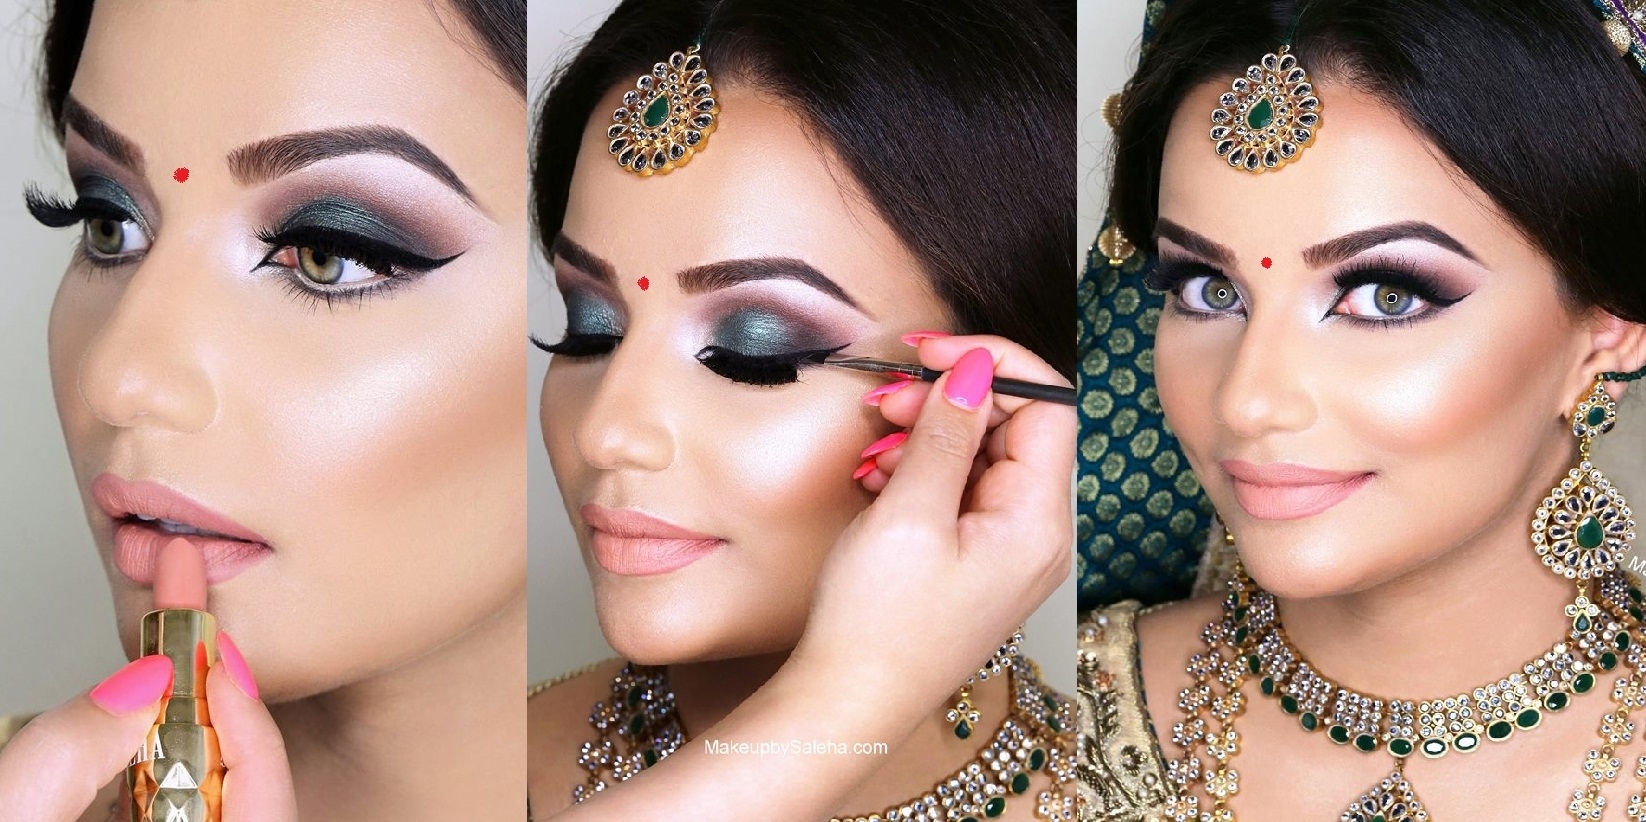 Indian Bridal Wedding Makeup Step By Step Tutorial With Pictures with Indian Makeup Step By Step Pictures